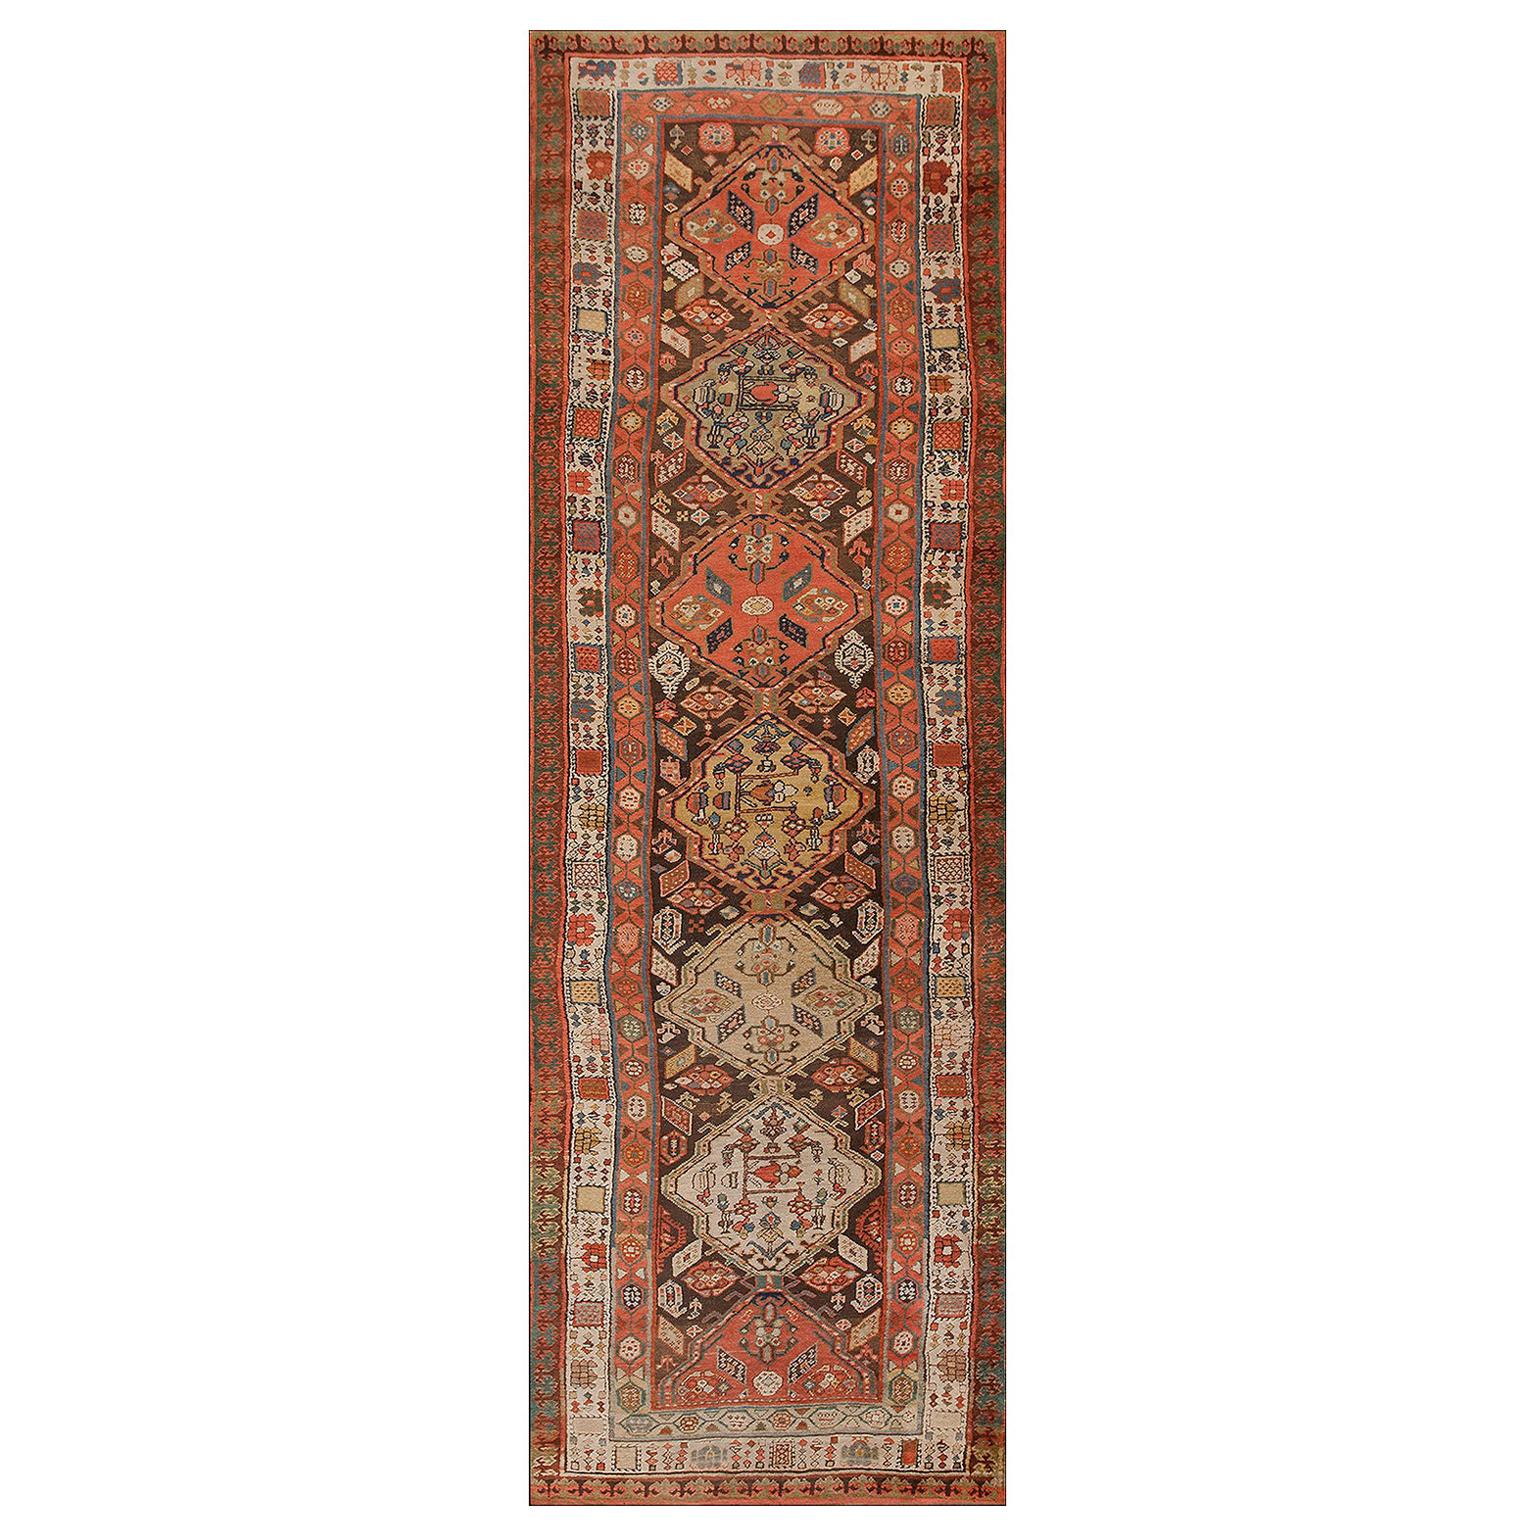 19th Century N.W. Persian Carpet ( 4'3" x 13' - 130 x 396 ) For Sale